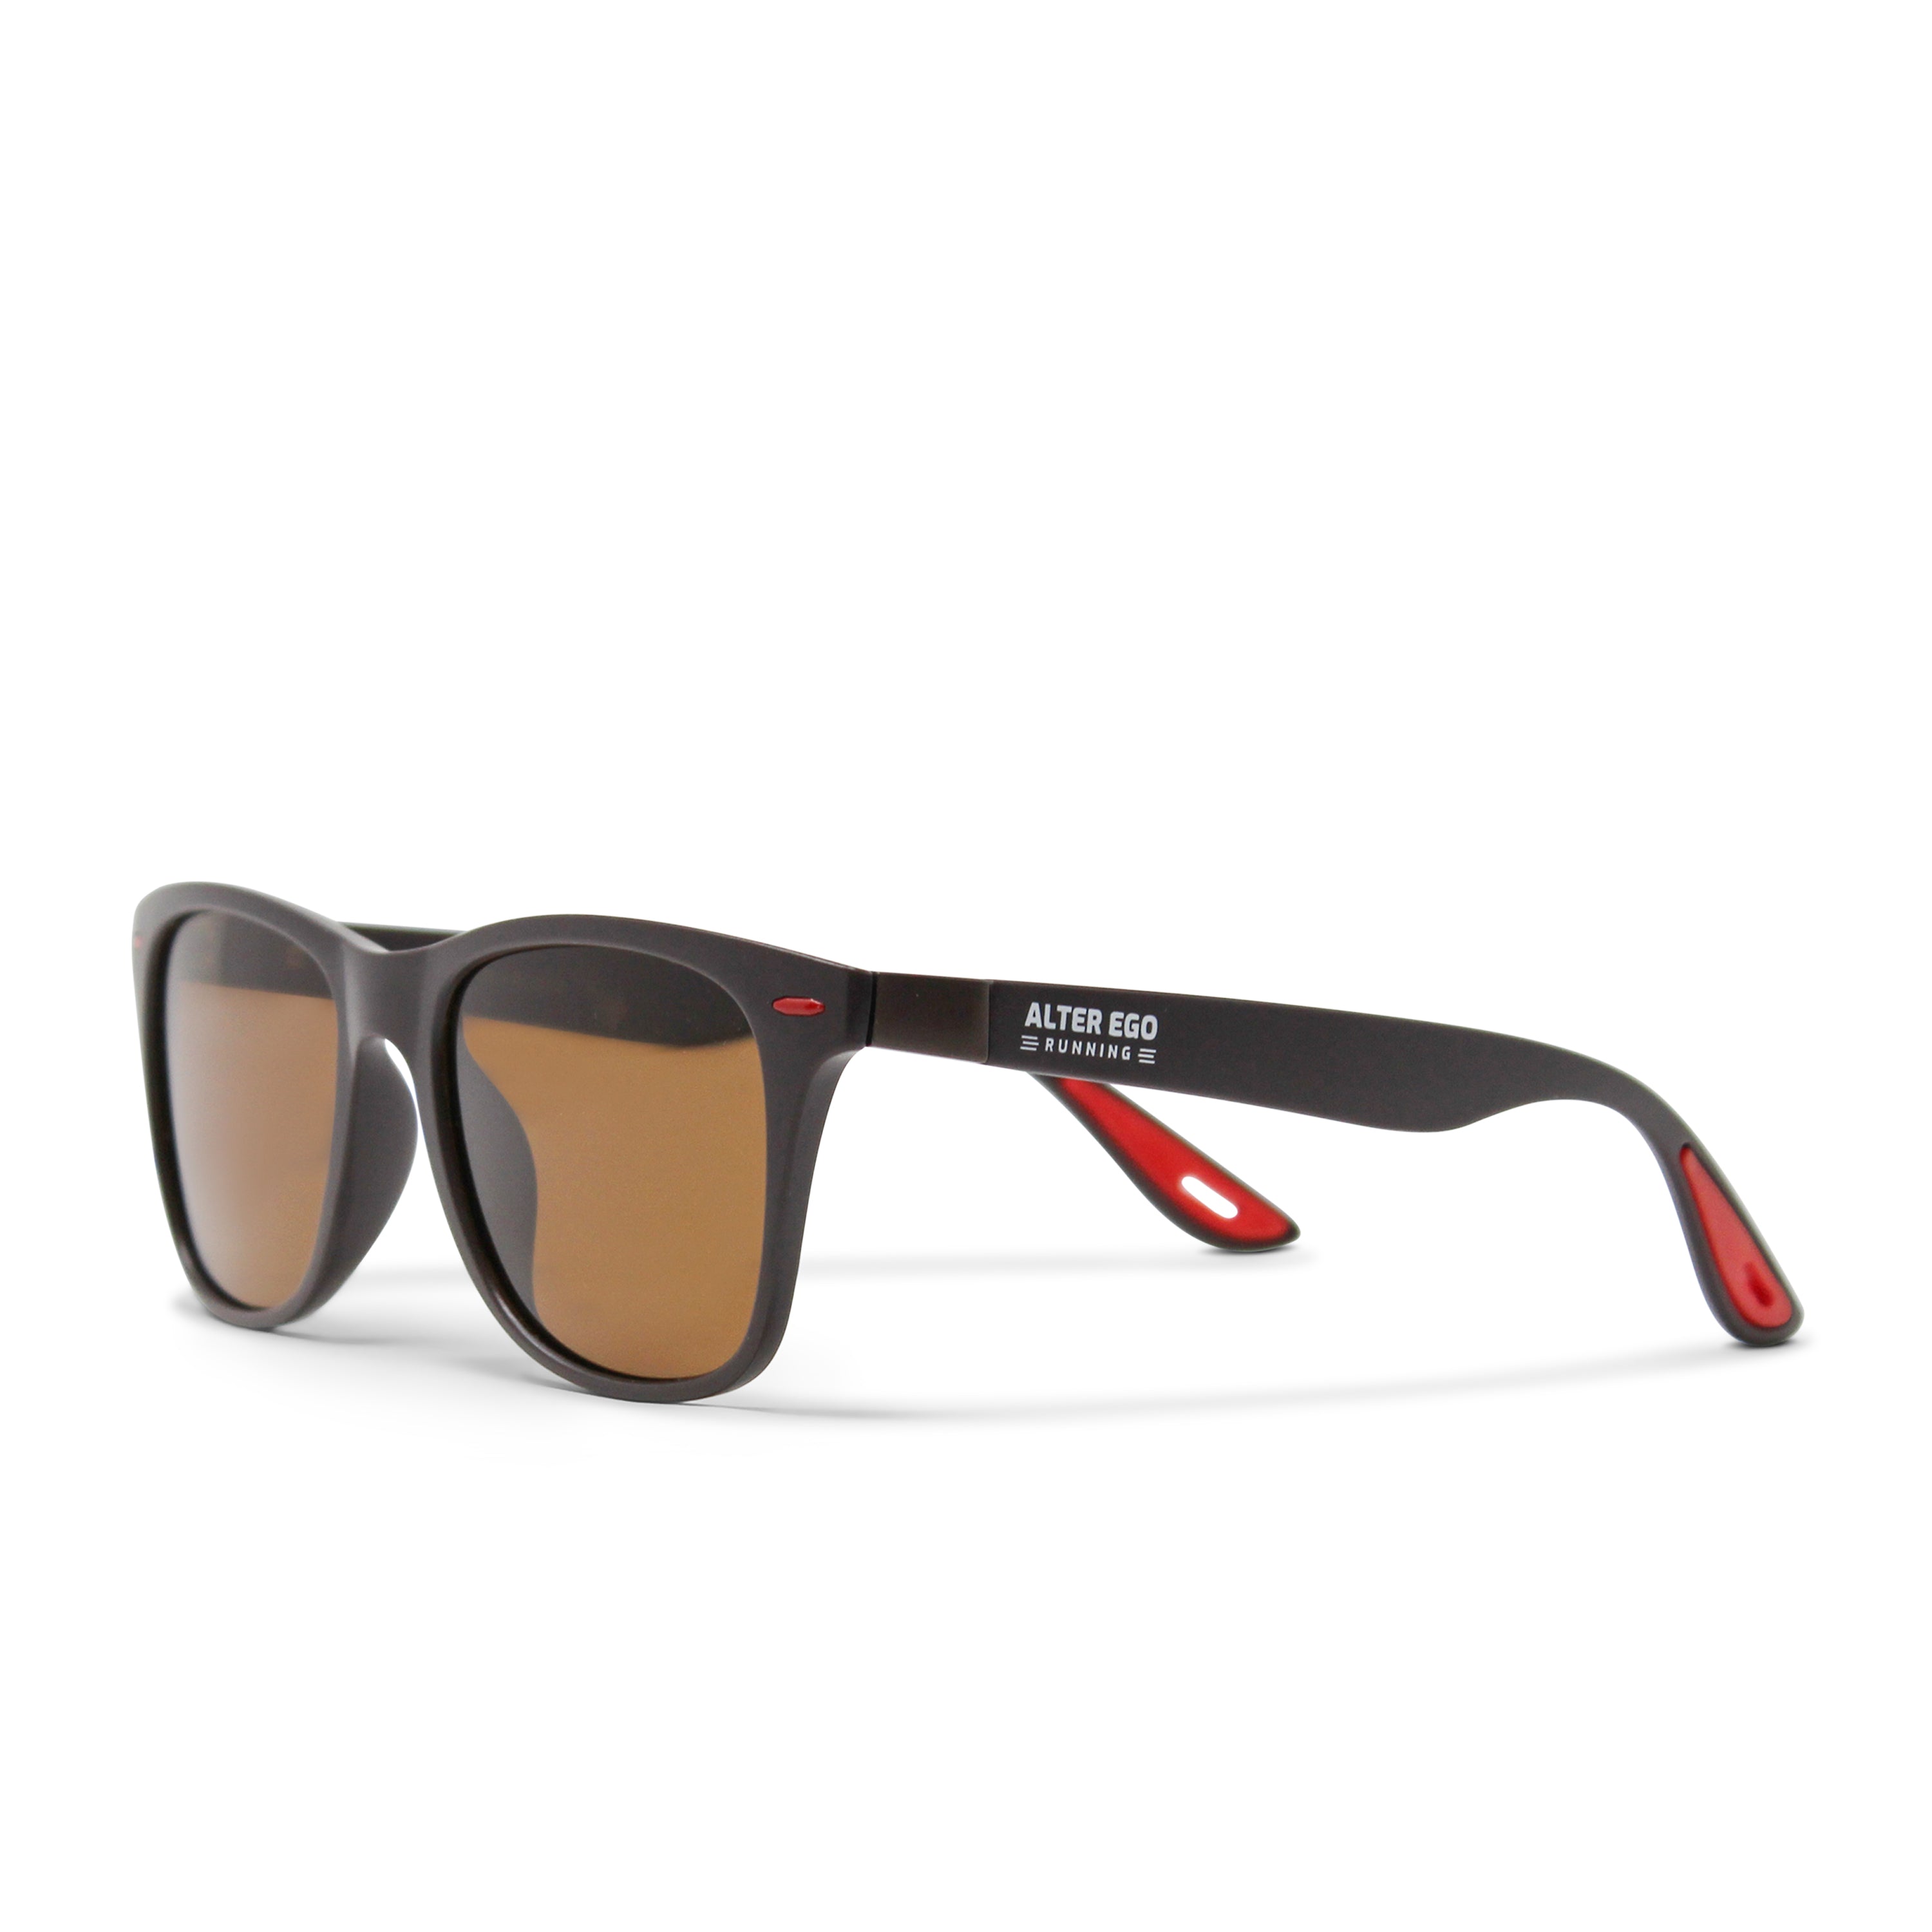 RUN Sunnies - Brown Frame | Brown Polarized Lenses | Red Elements